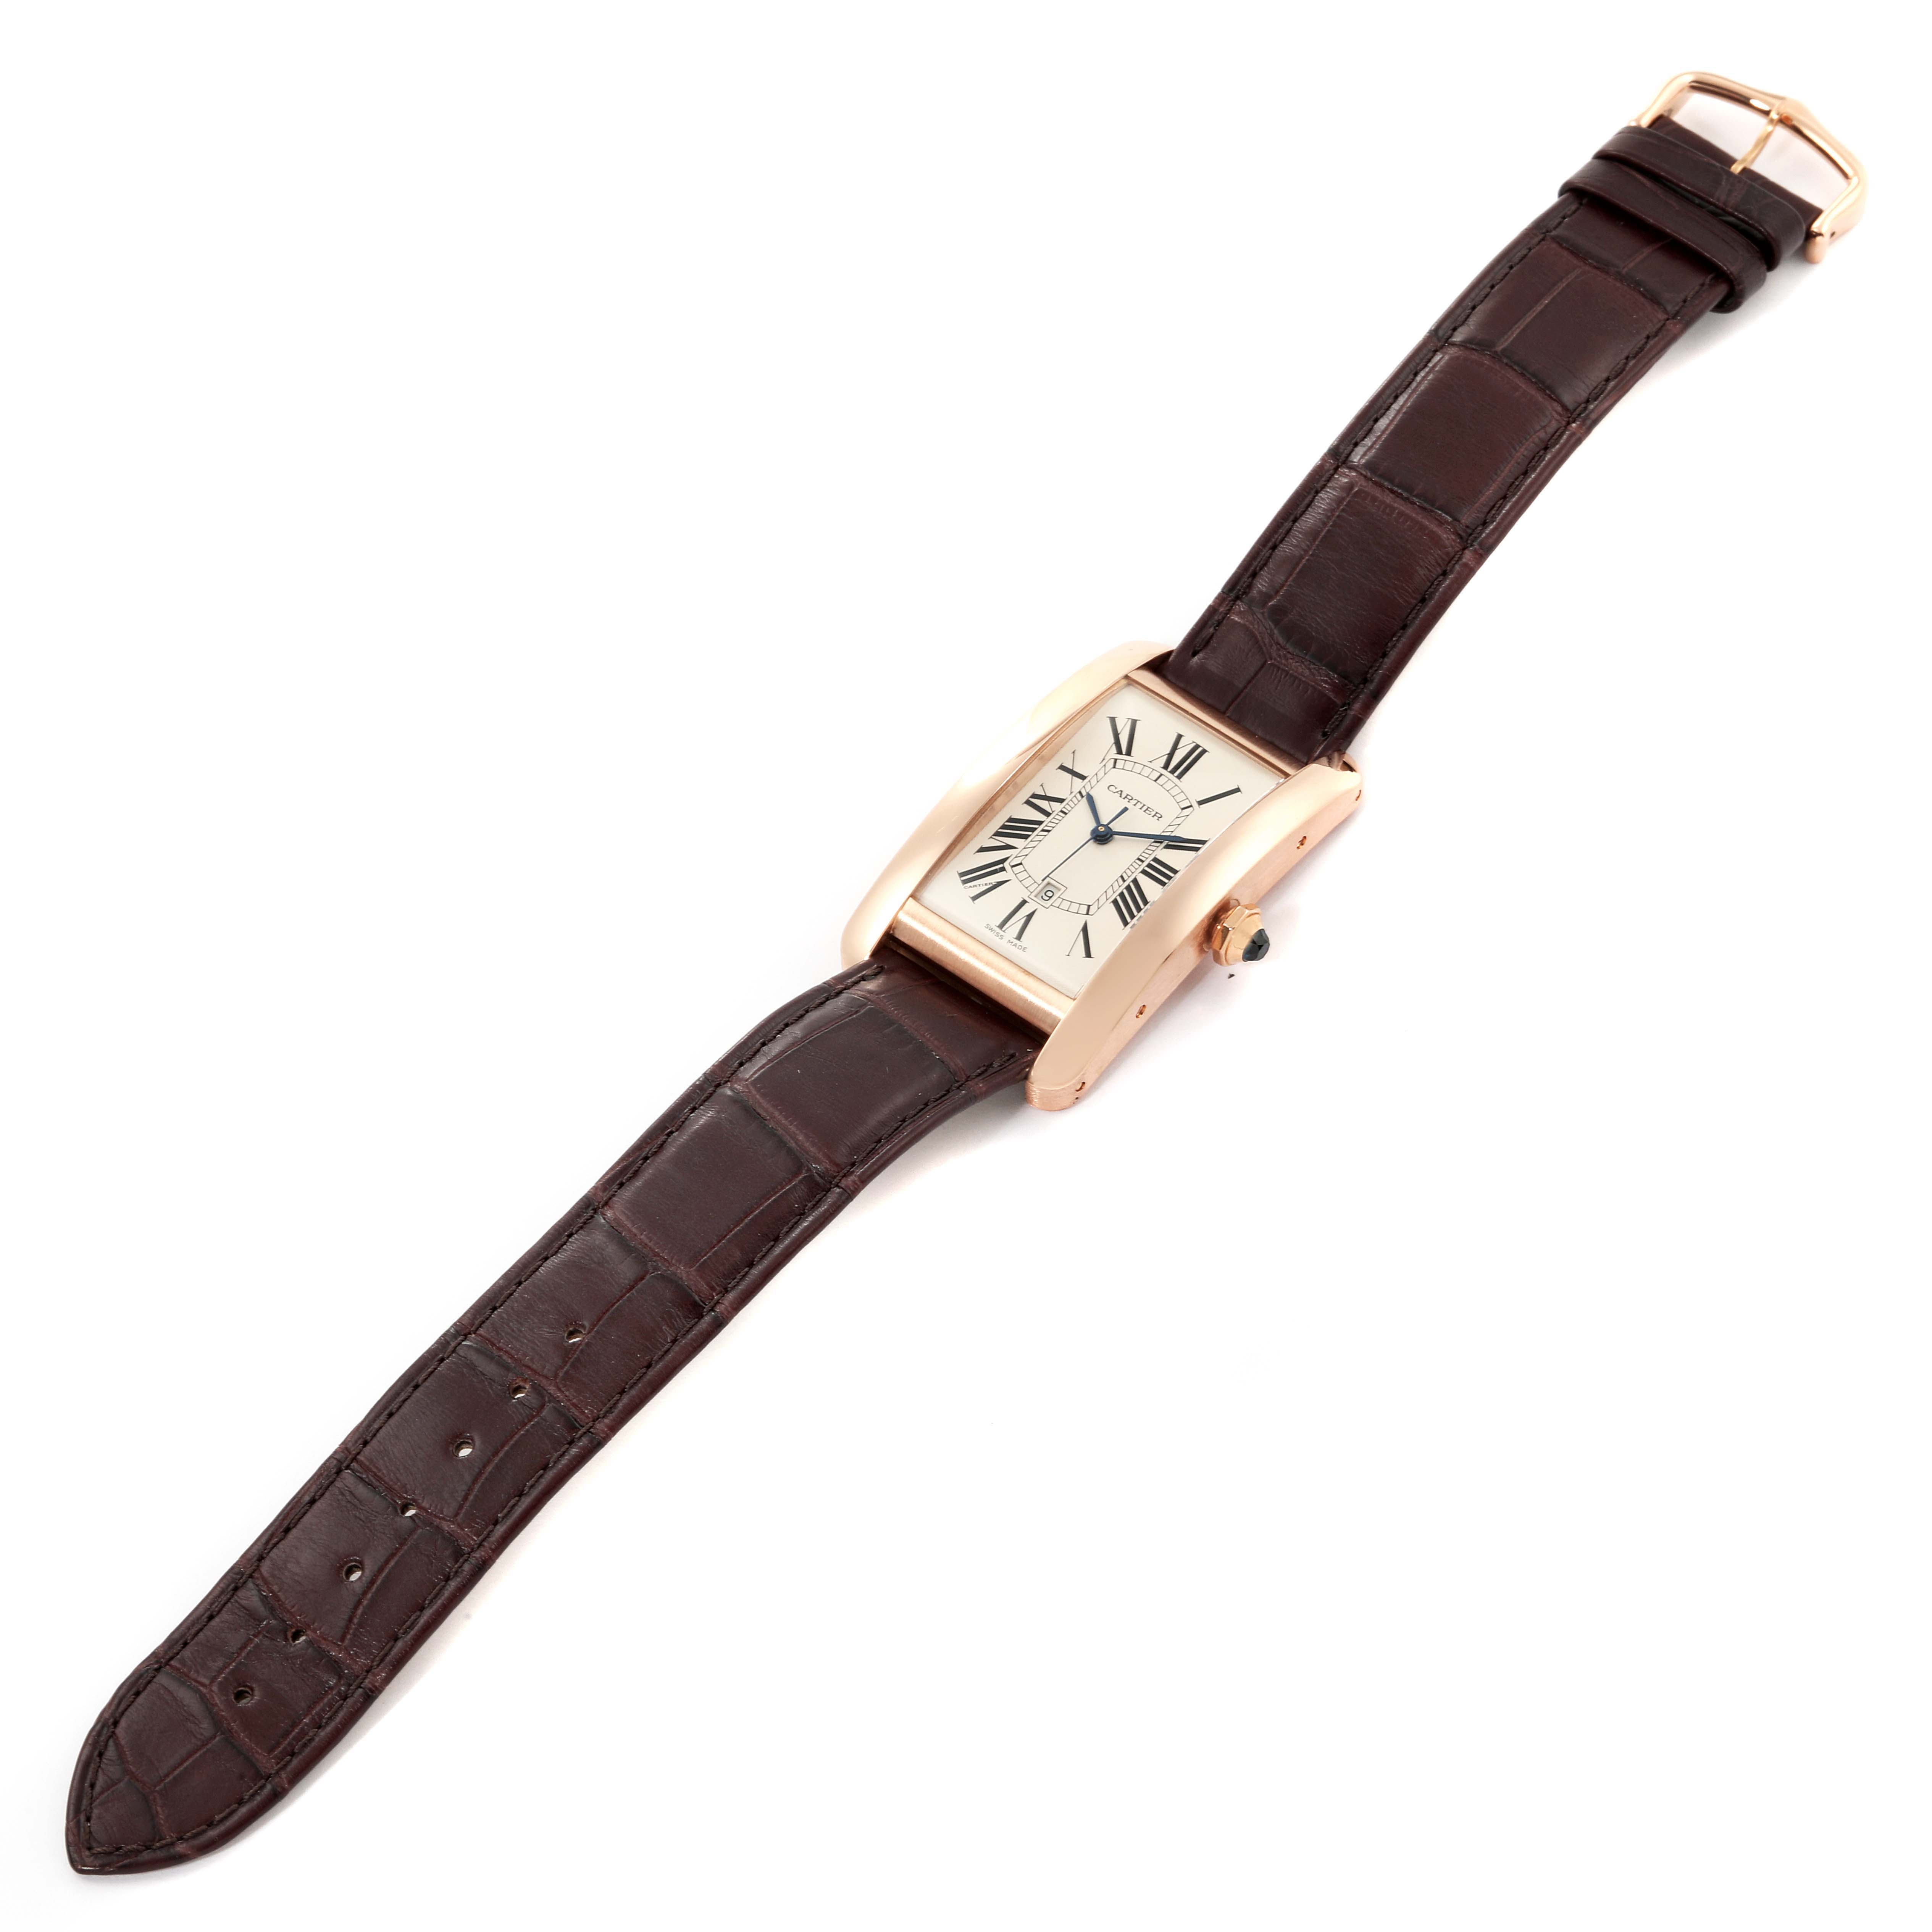 Cartier Tank Americaine Large 18K Rose Gold Mens Watch W2609156 Box ...